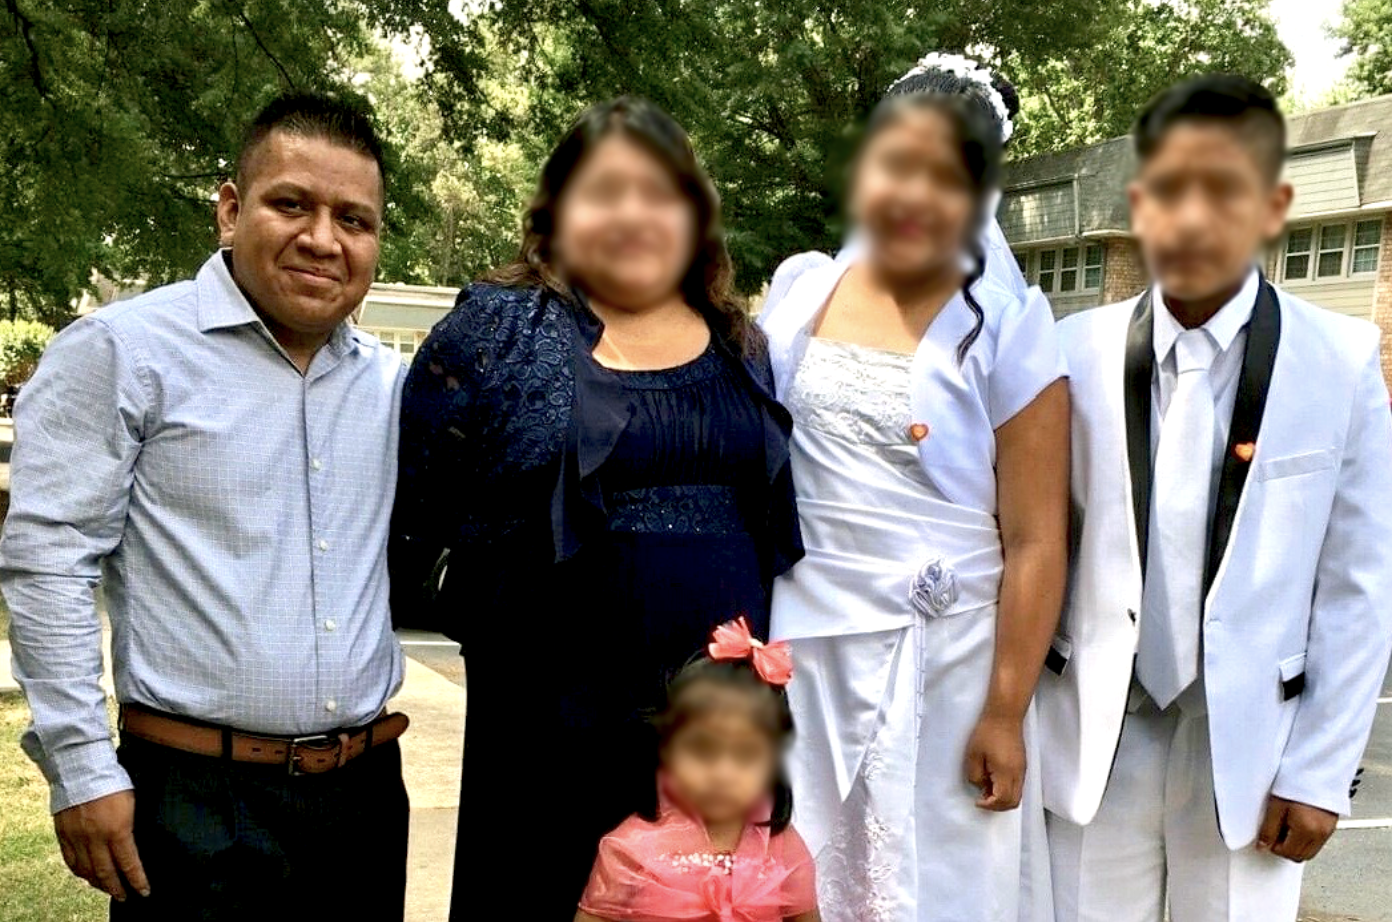 Santiago Baten-Oxlaj, a 34-year-old Guatemalan father of four, was the youngest to die of COVID-19 in ICE custody. Family Photo (Edited). Image courtesy of the Texas Observer. Undated. 